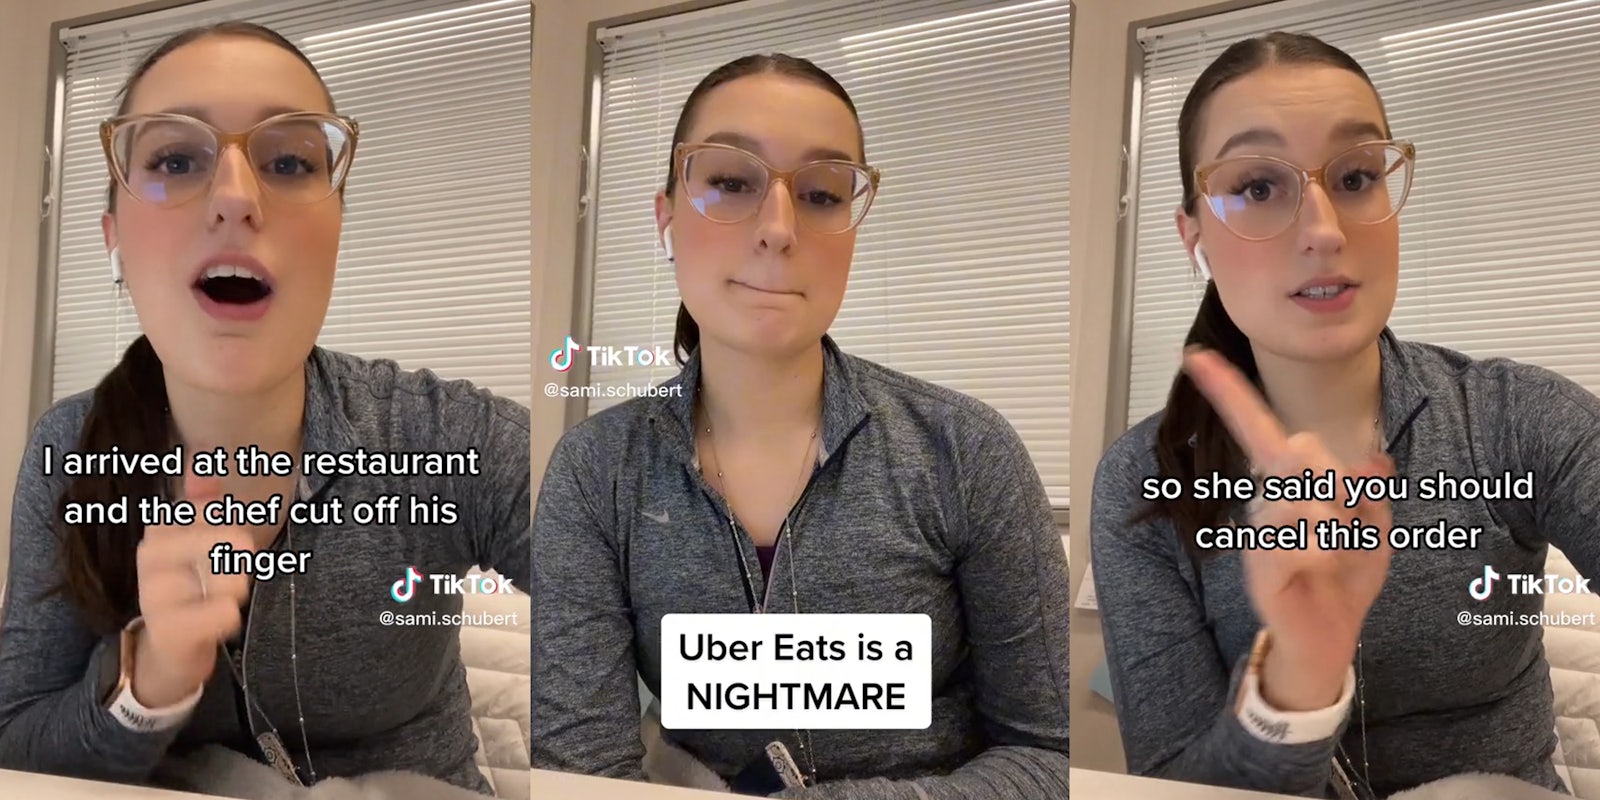 young woman with captions 'i arrived at the restaurant and the chef cut off his finger', 'uber eats is a nightmare', and 'so she said you should cancel this order'